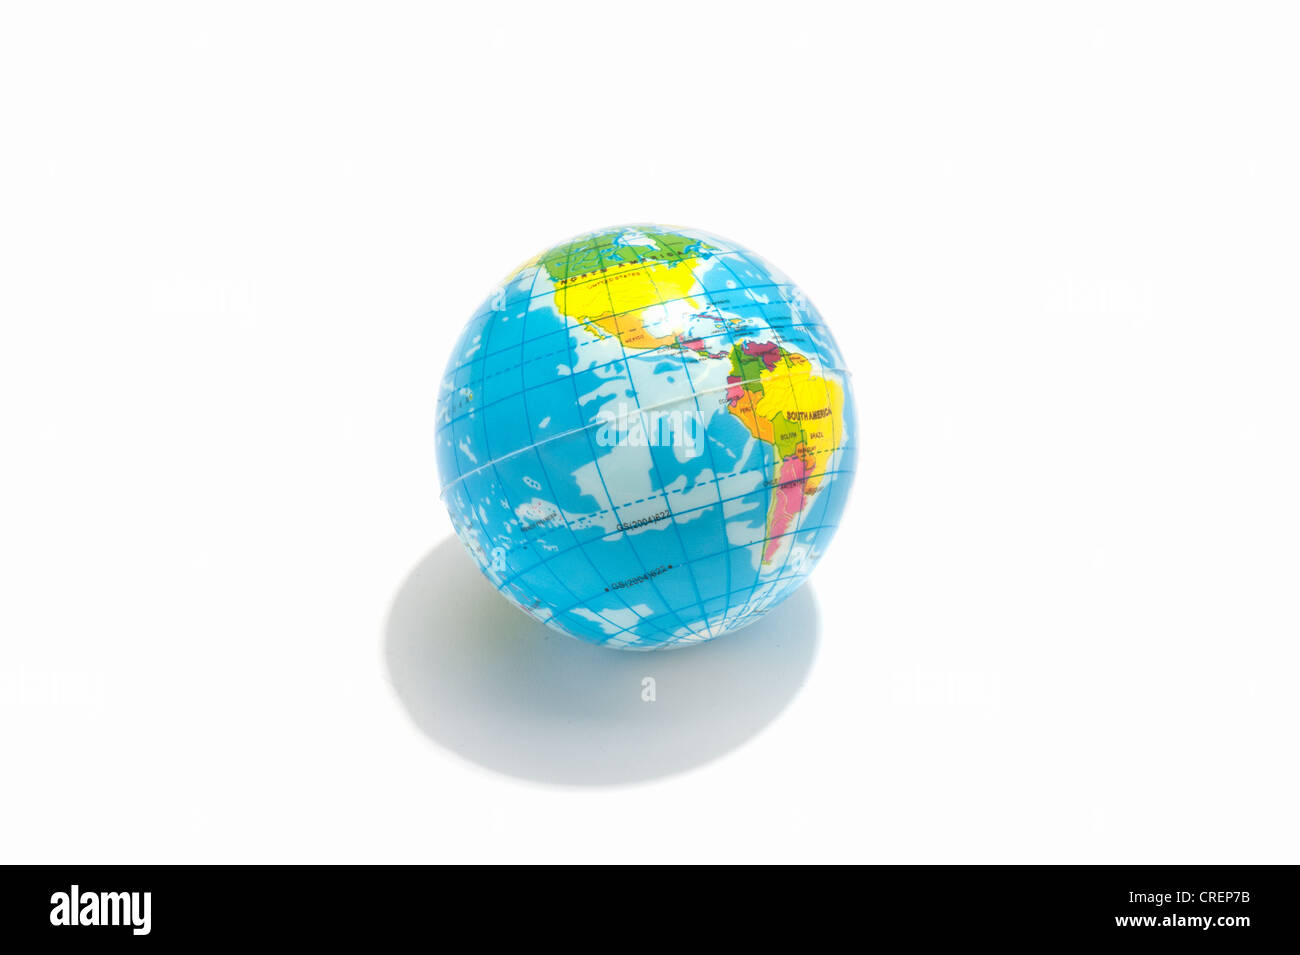 A toy globe showing North and South America Stock Photo